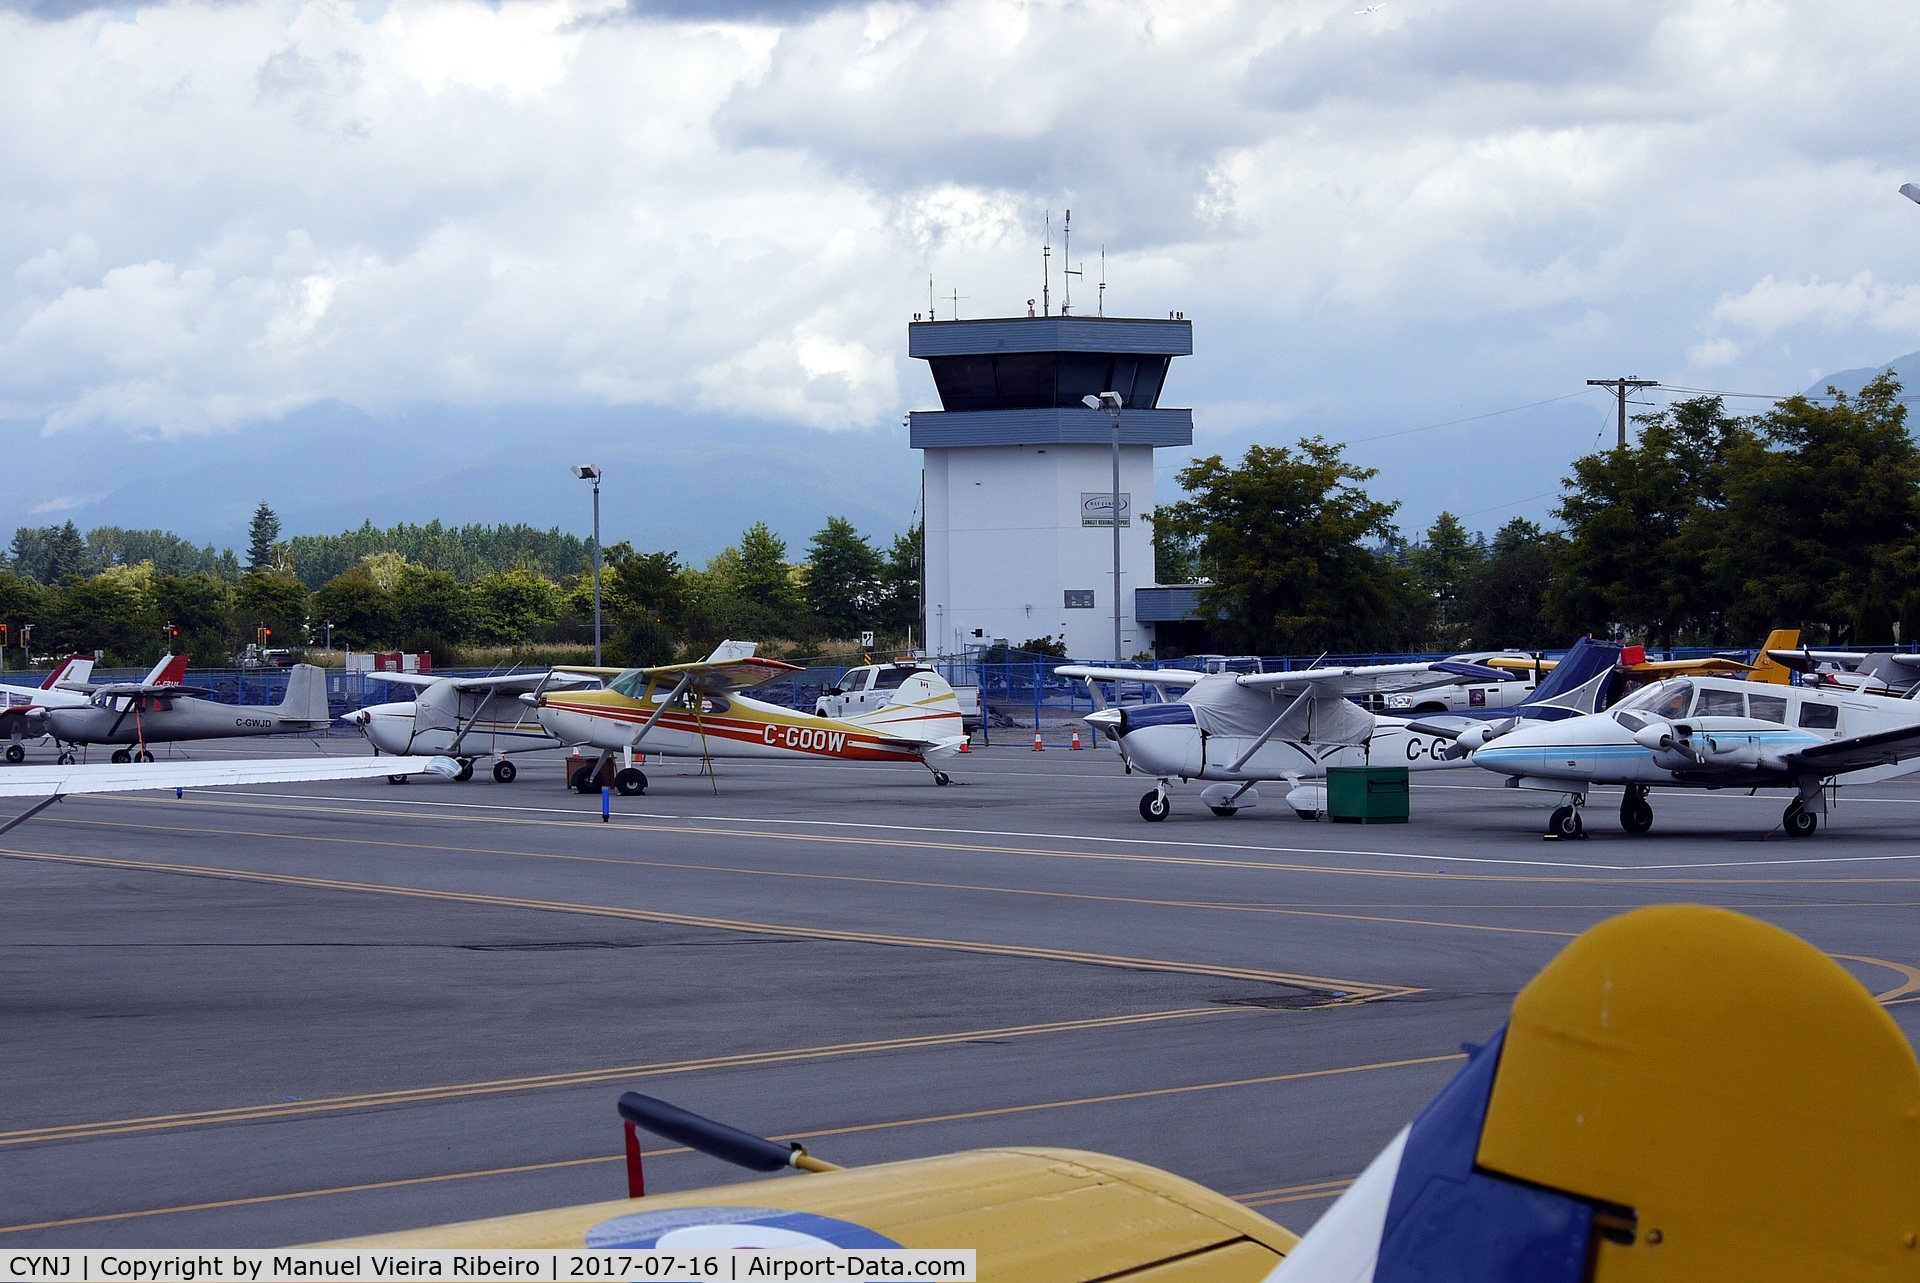 Langley Regional Airport, Langley, BC Canada (CYNJ) - Sunday afternoon